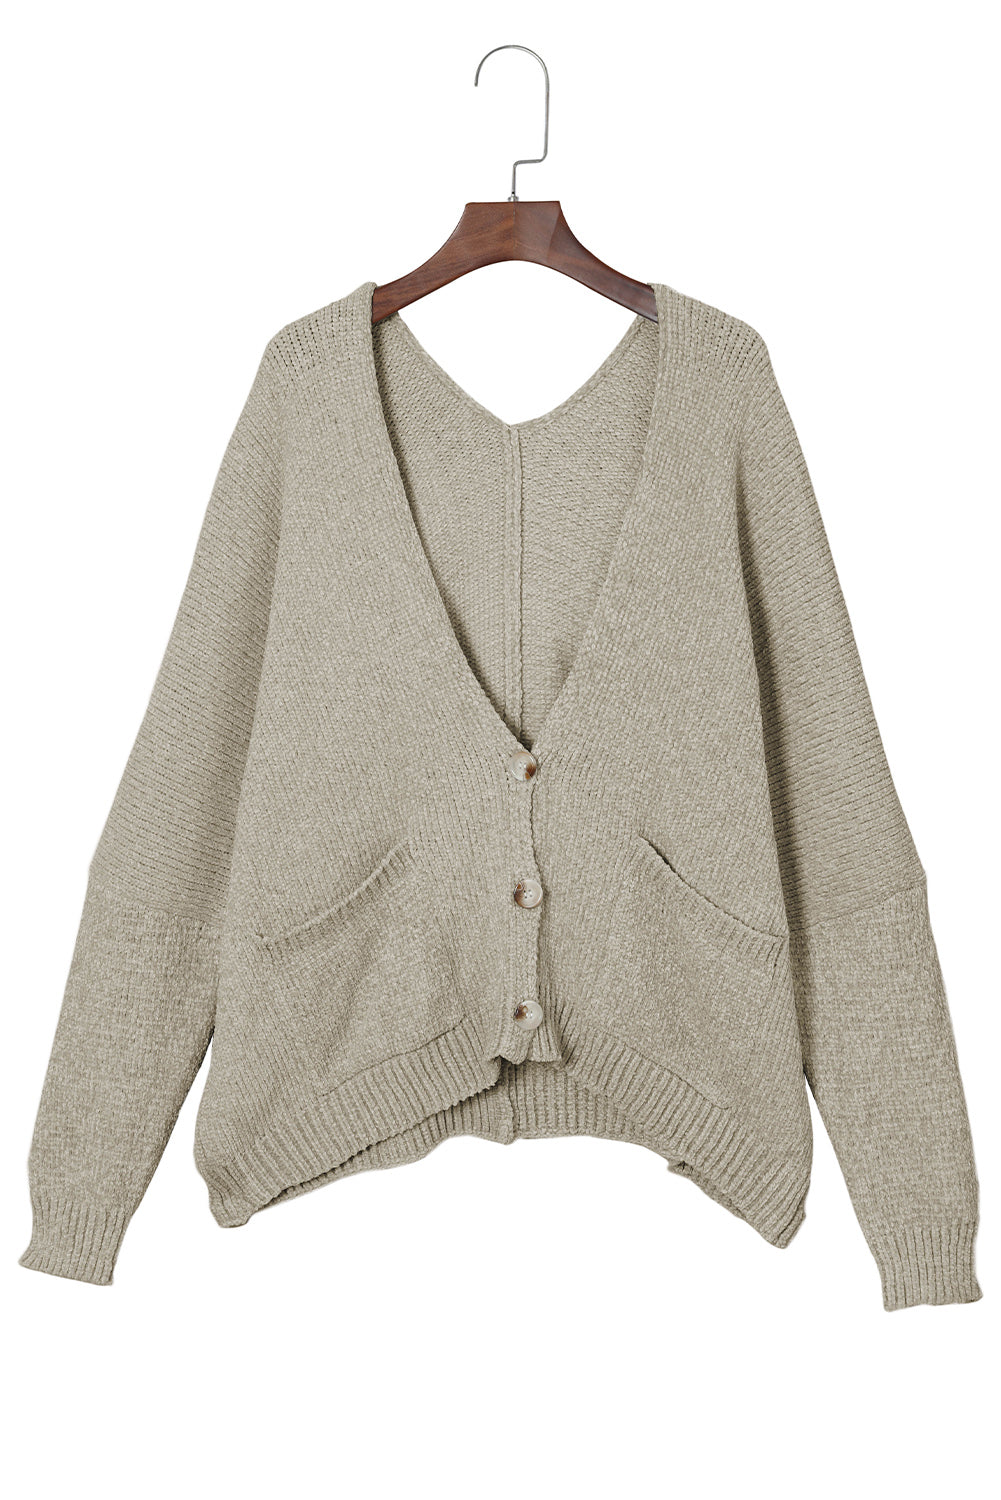 Buttons Front Pocketed Sweater Cardigan